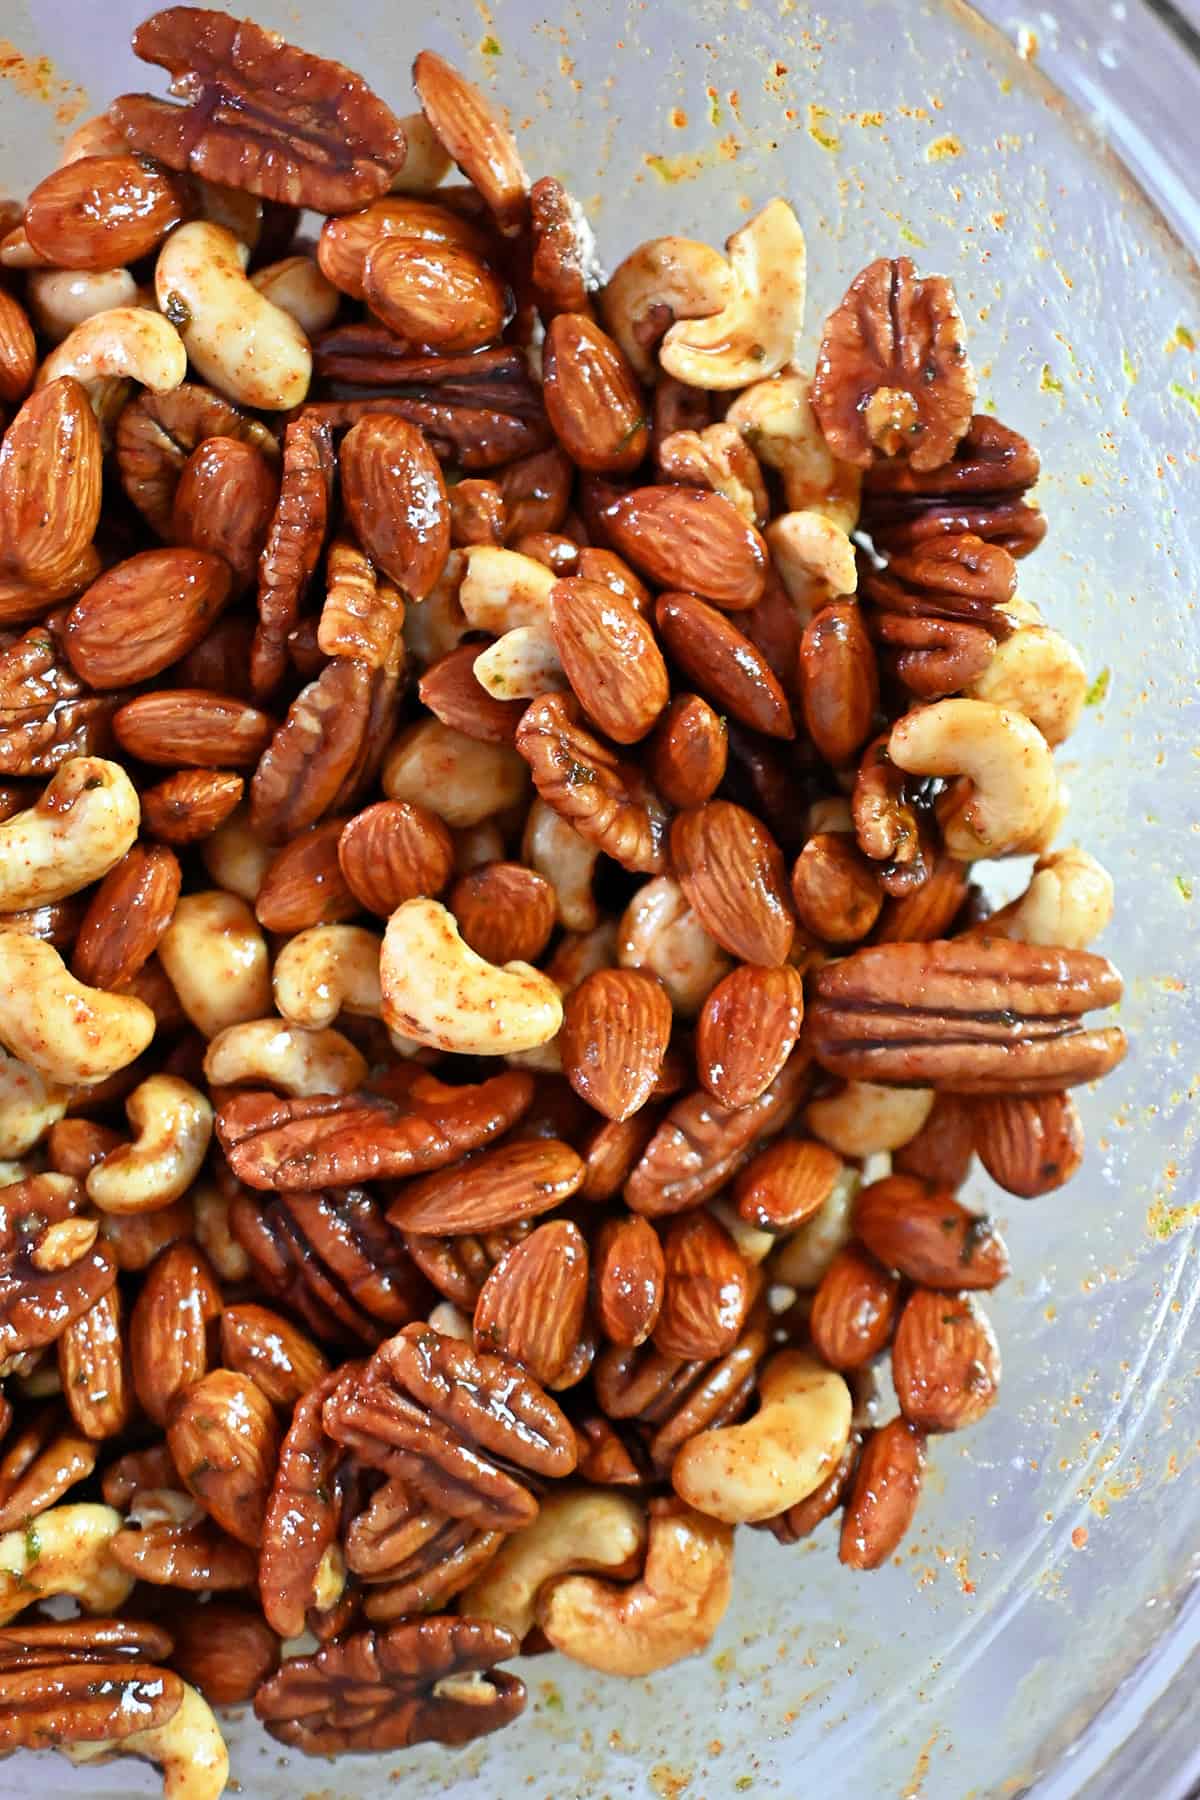 Raw mixed nuts tossed in a spice-packed sauce in a large glass bowl.